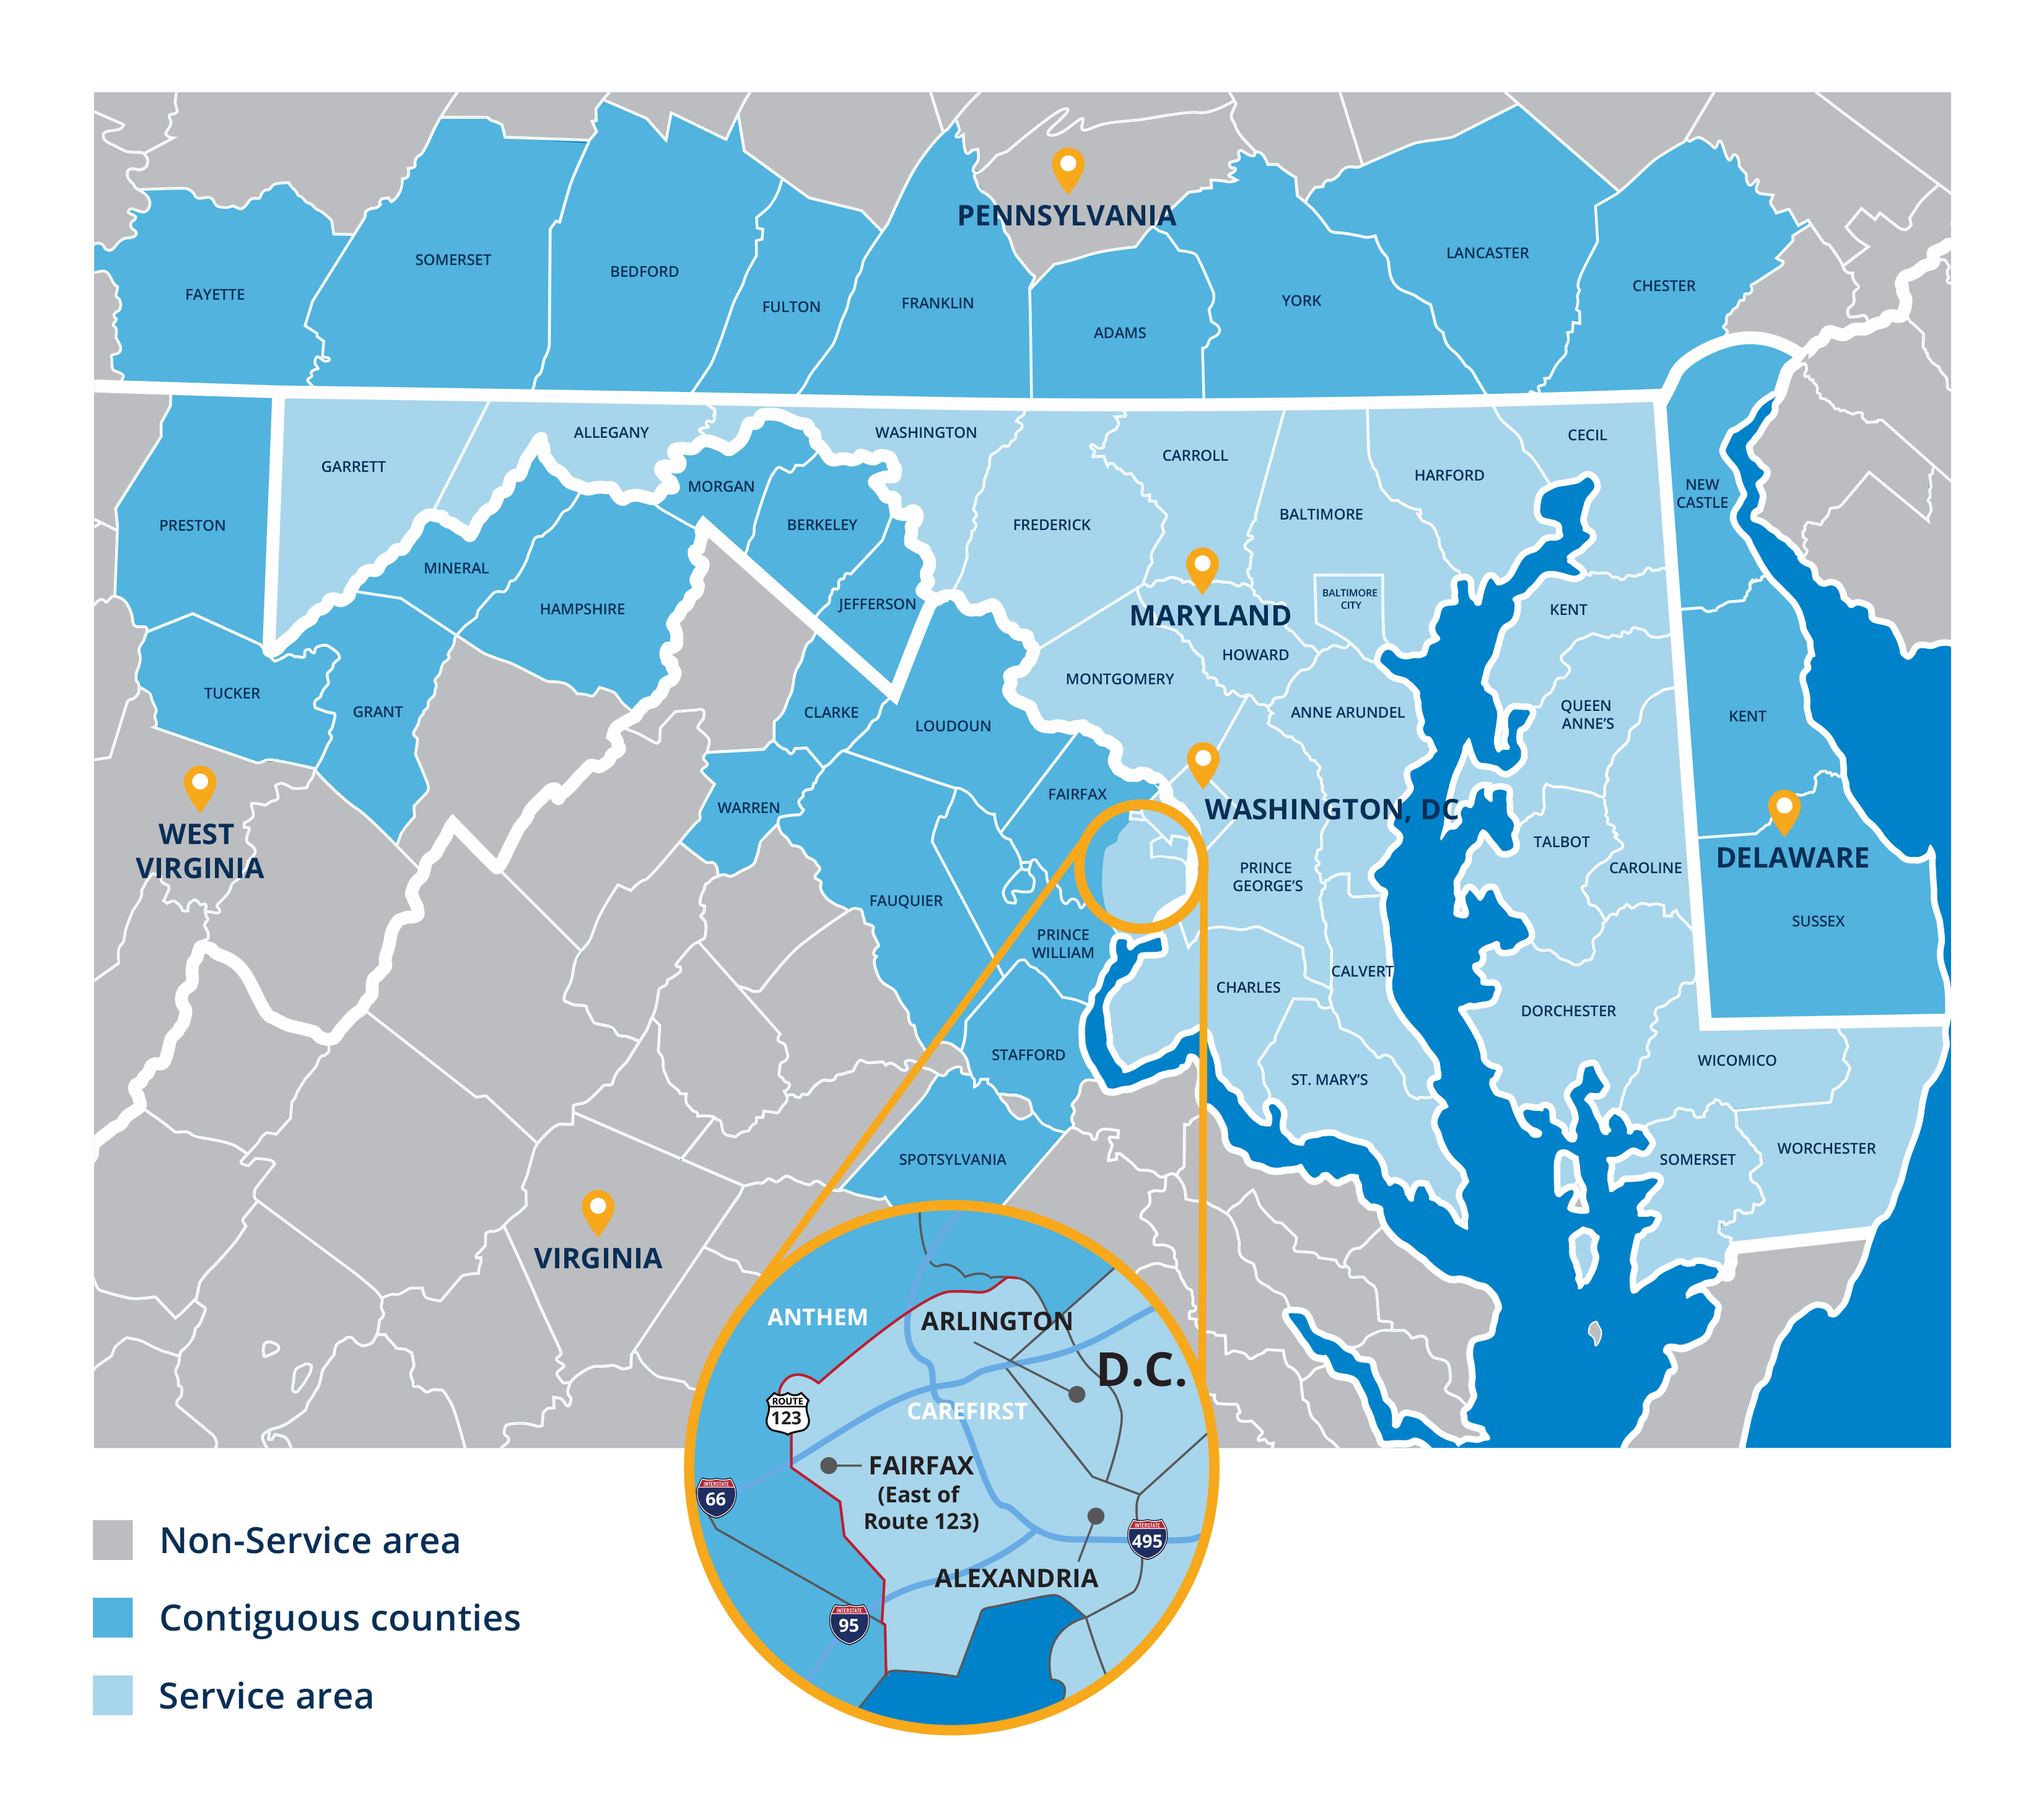 Carefirst blue cross blue shield baltimore md map understanding temporal changes of access to healthcare